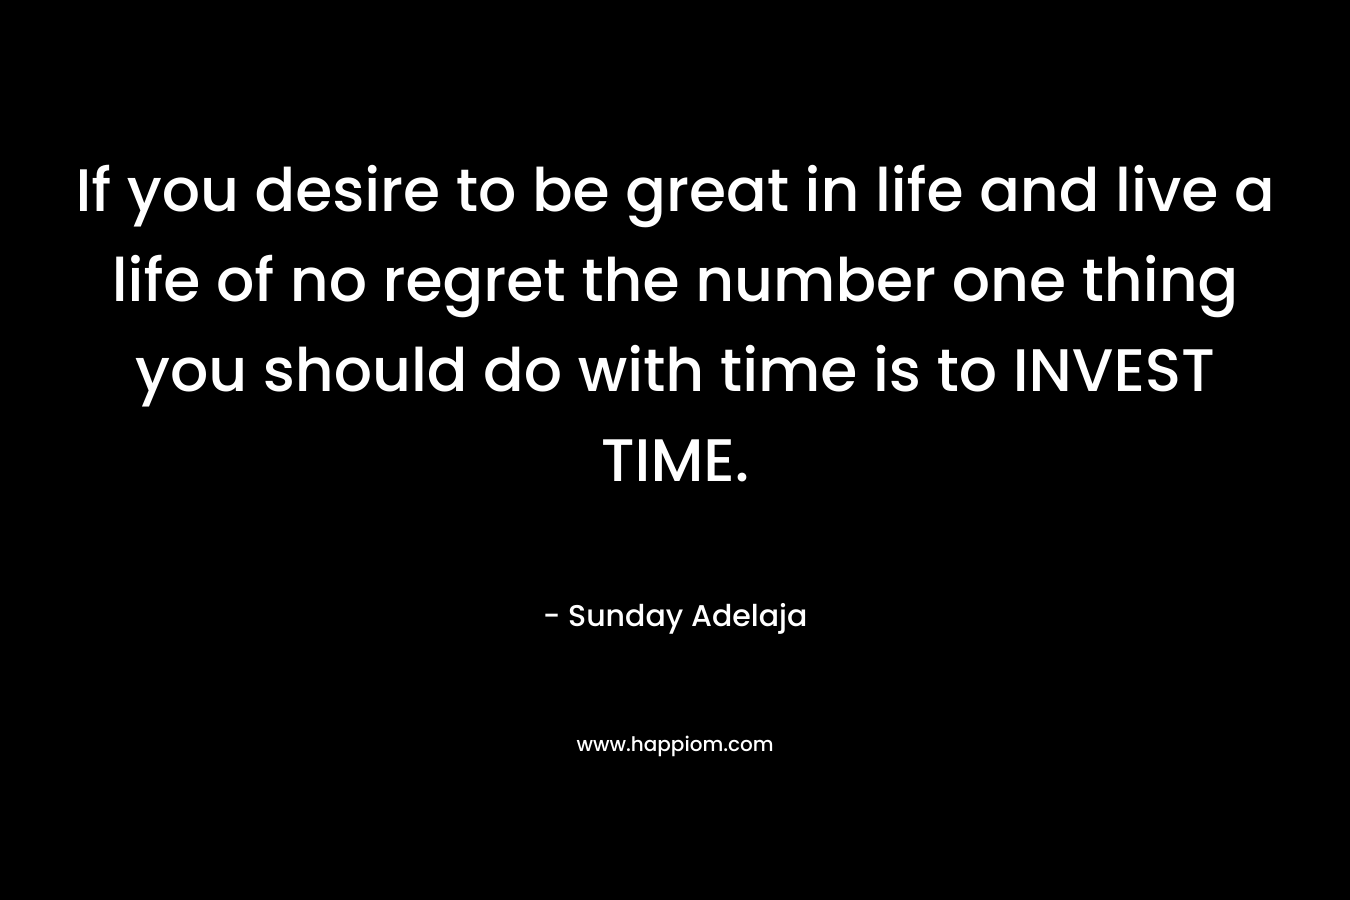 If you desire to be great in life and live a life of no regret the number one thing you should do with time is to INVEST TIME.